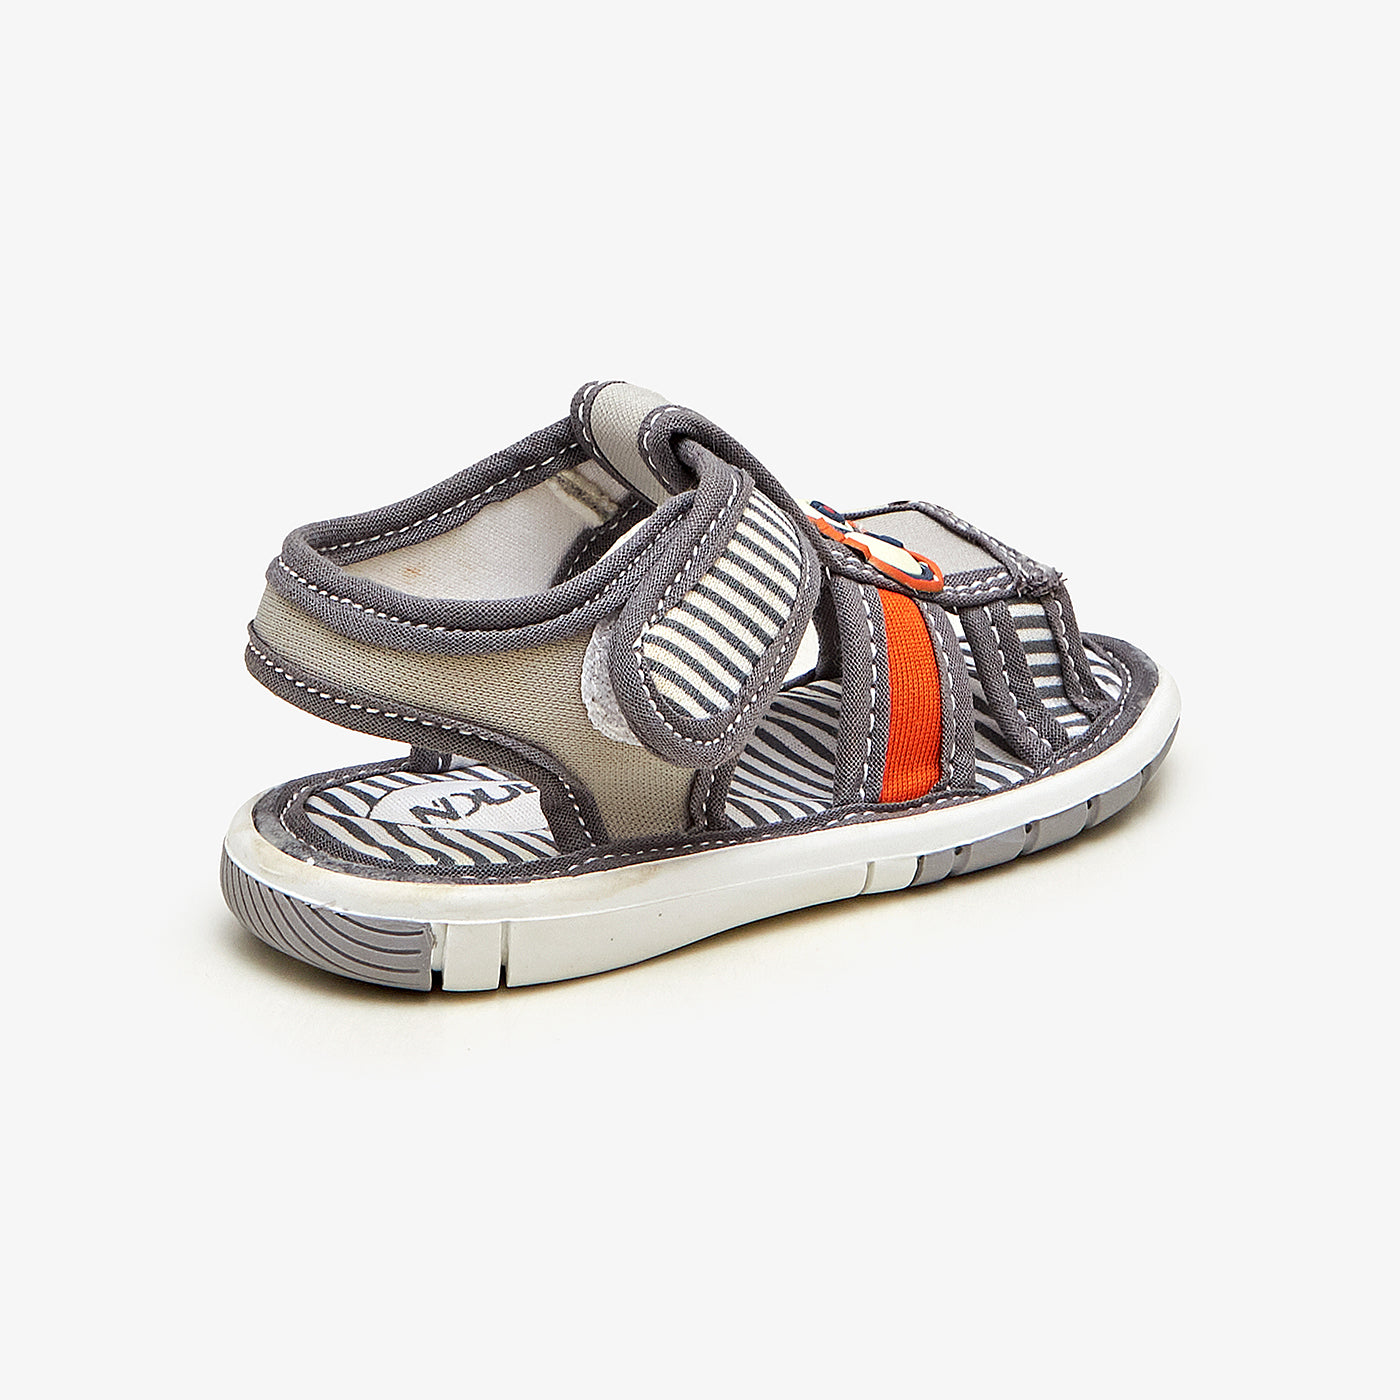 Funky Sandals for Boys